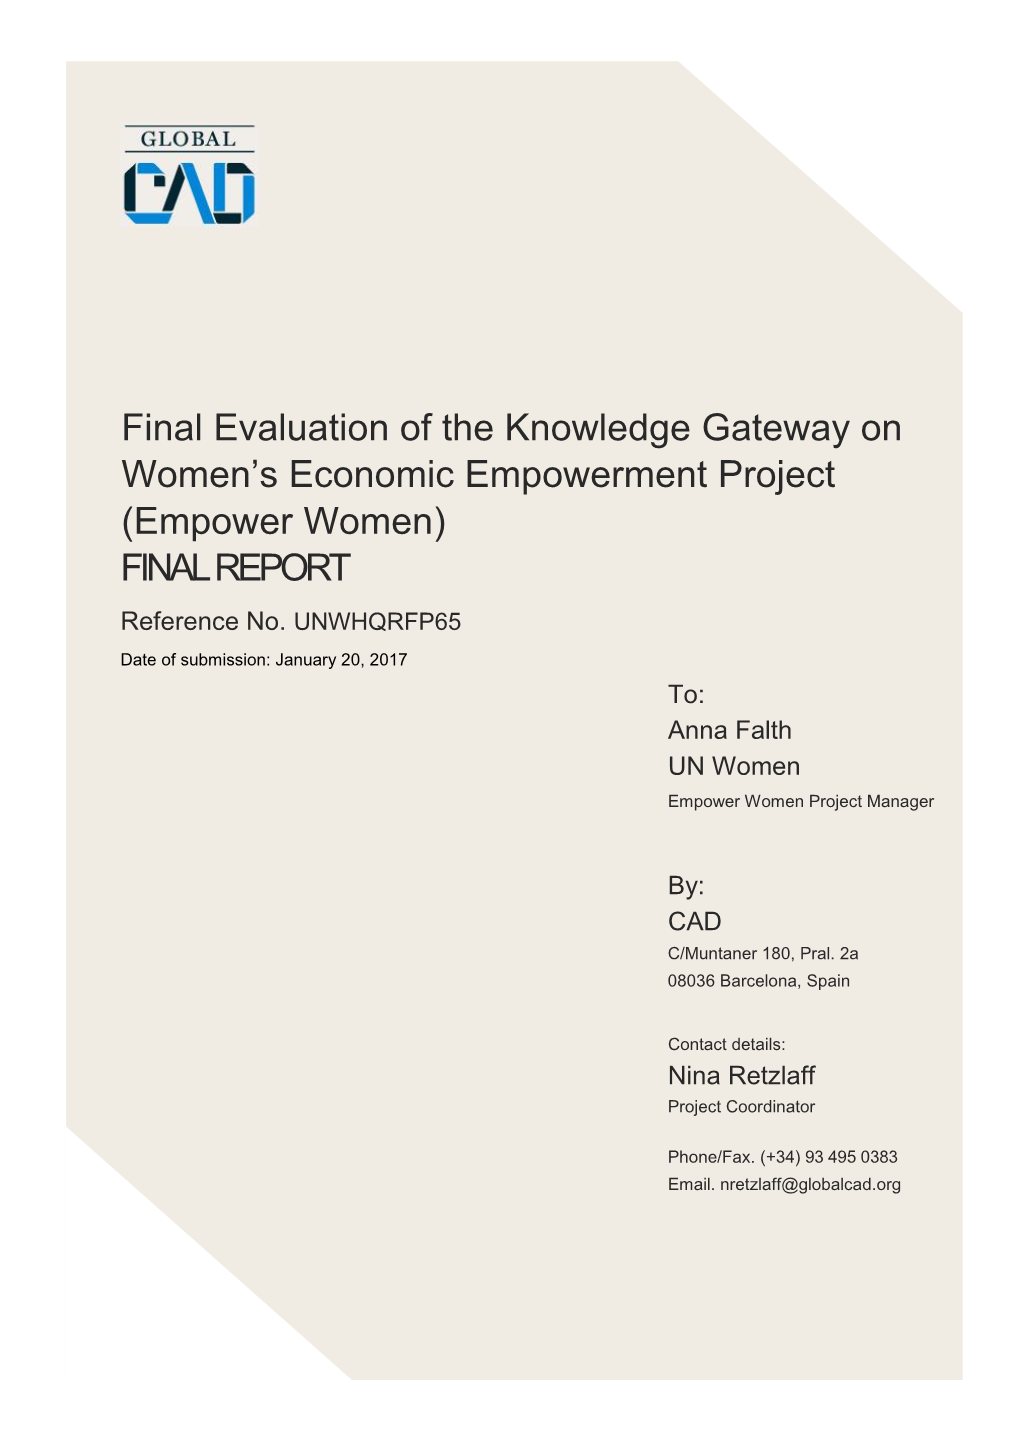 Final Evaluation of the Knowledge Gateway on Women's Economic